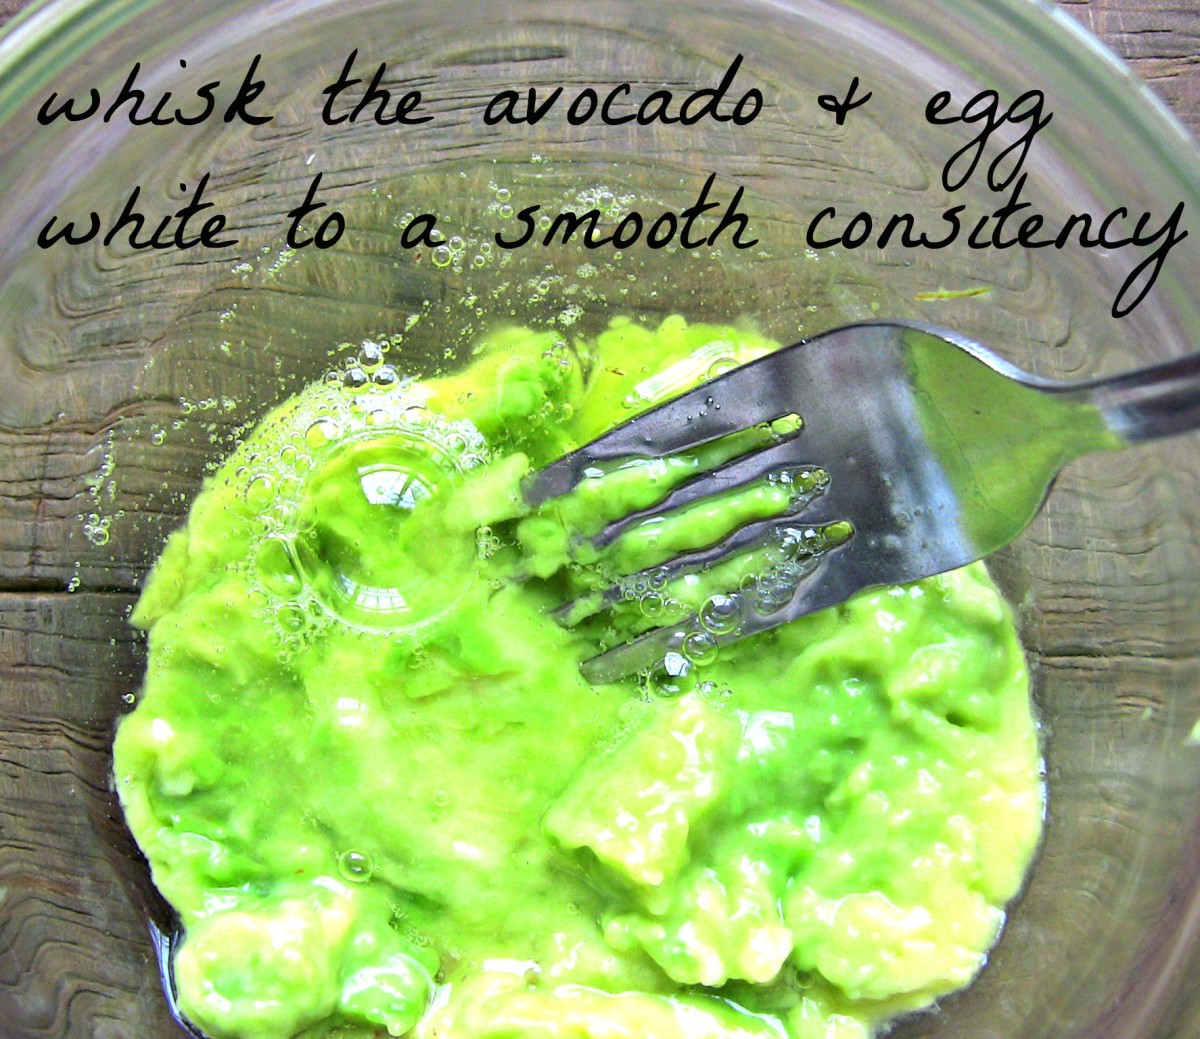 All you need is a fork to whip up this moisturizing and firming avocado egg white face mask.